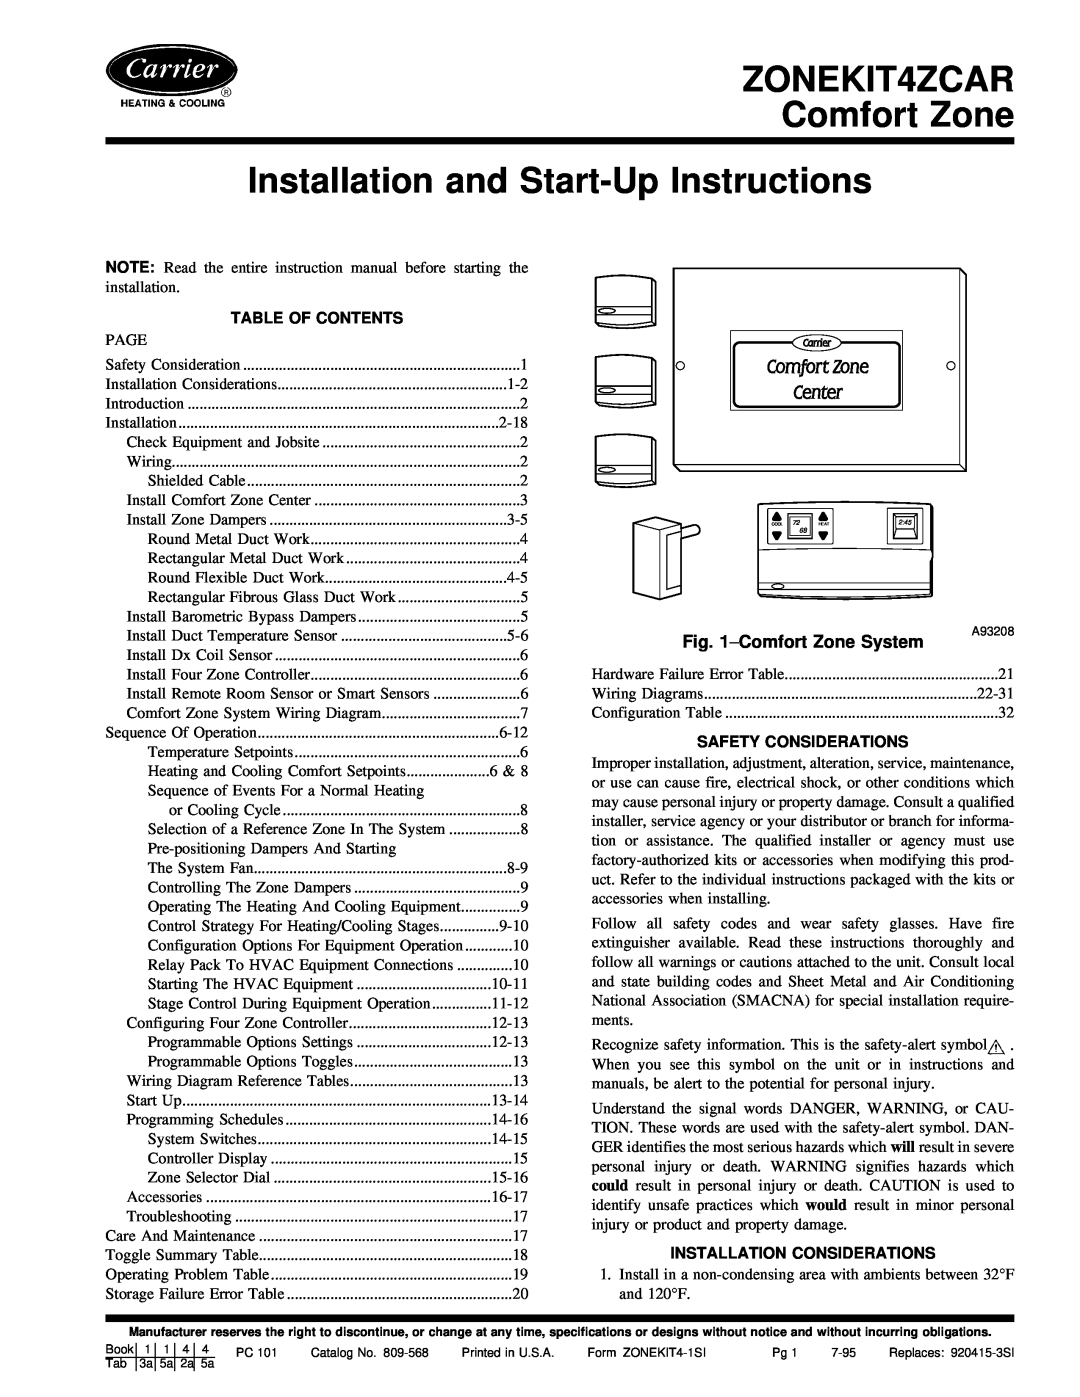 Carrier ZONEKIT4ZCAR instruction manual Comfort Zone System, Table Of Contents, Safety Considerations 